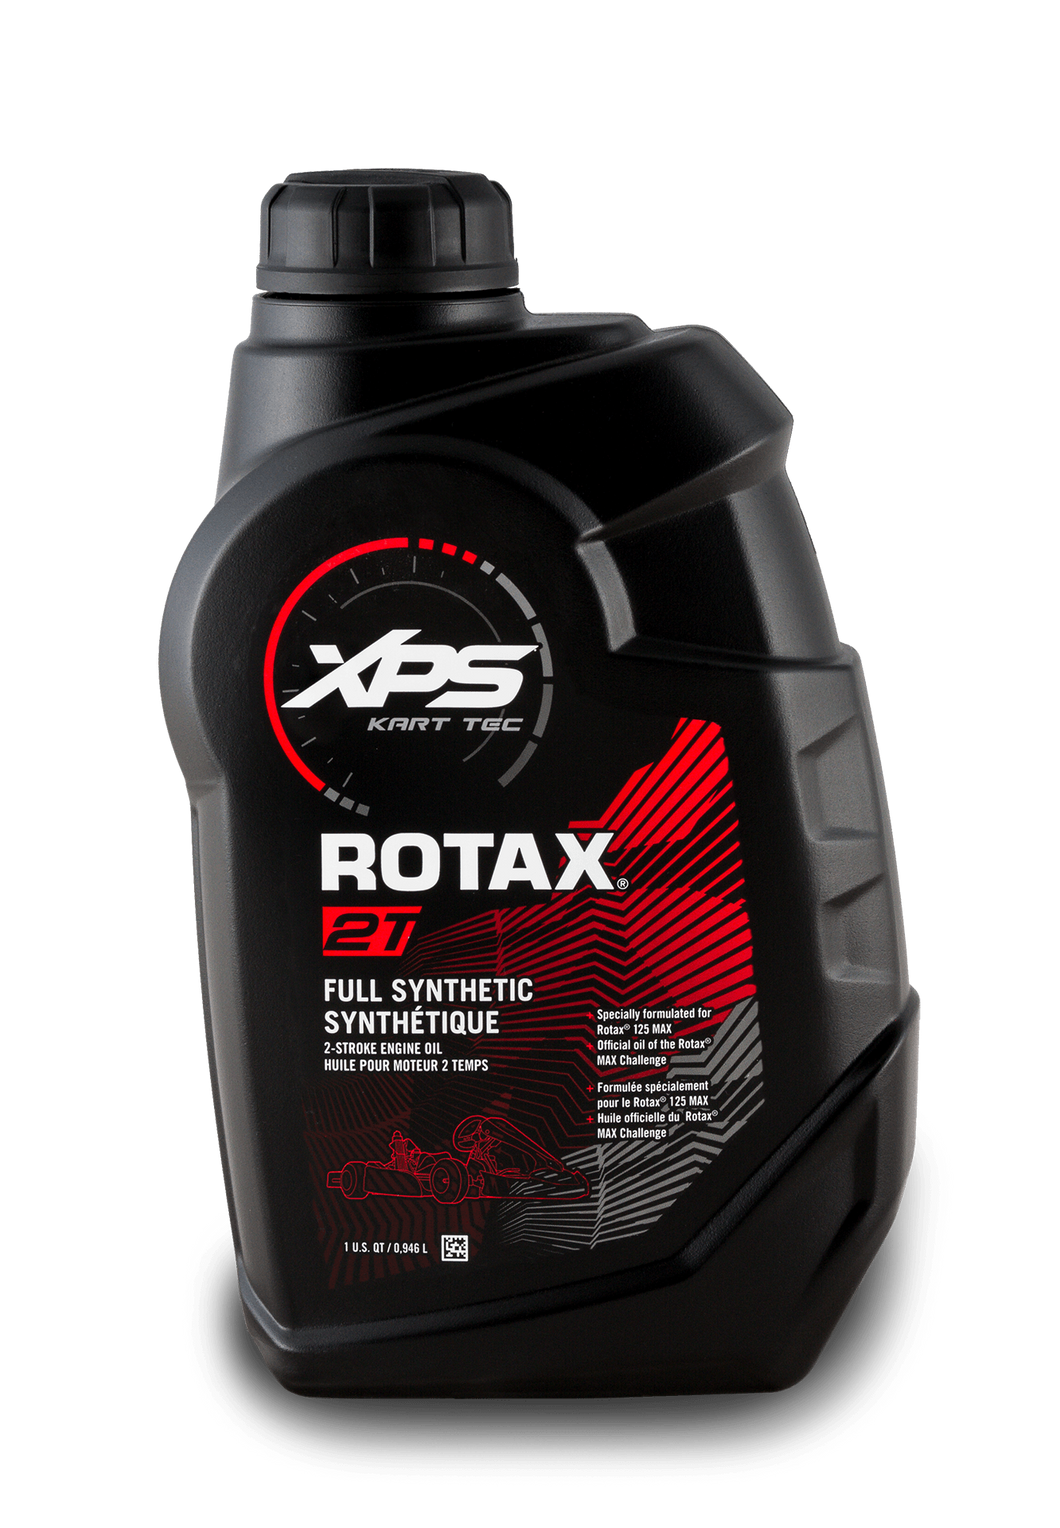 Rotax XPS Oil